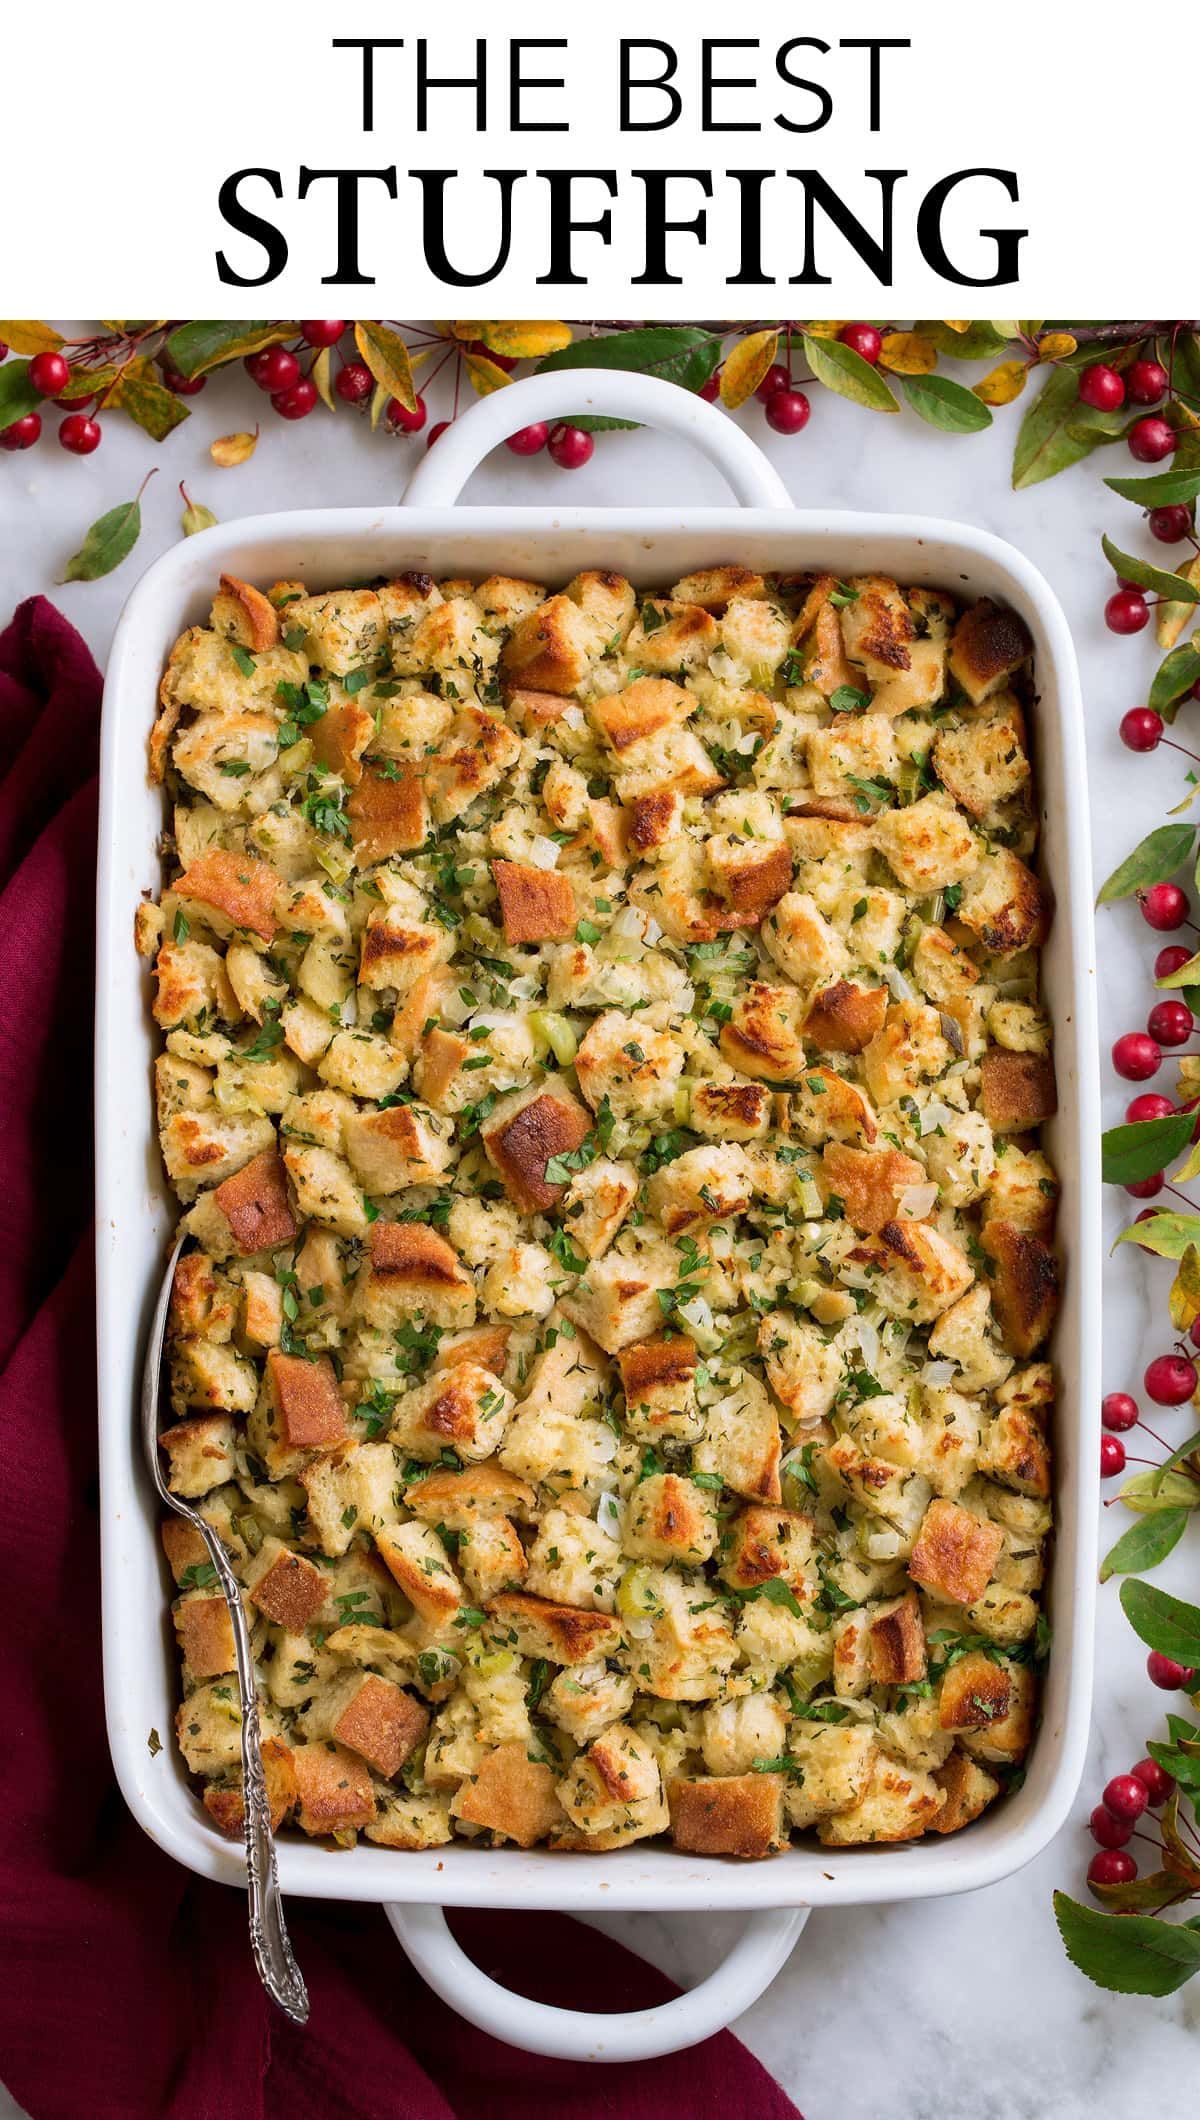 Stuffing Recipe - Cooking Classy -   16 thanksgiving recipes turkey stuffing ideas